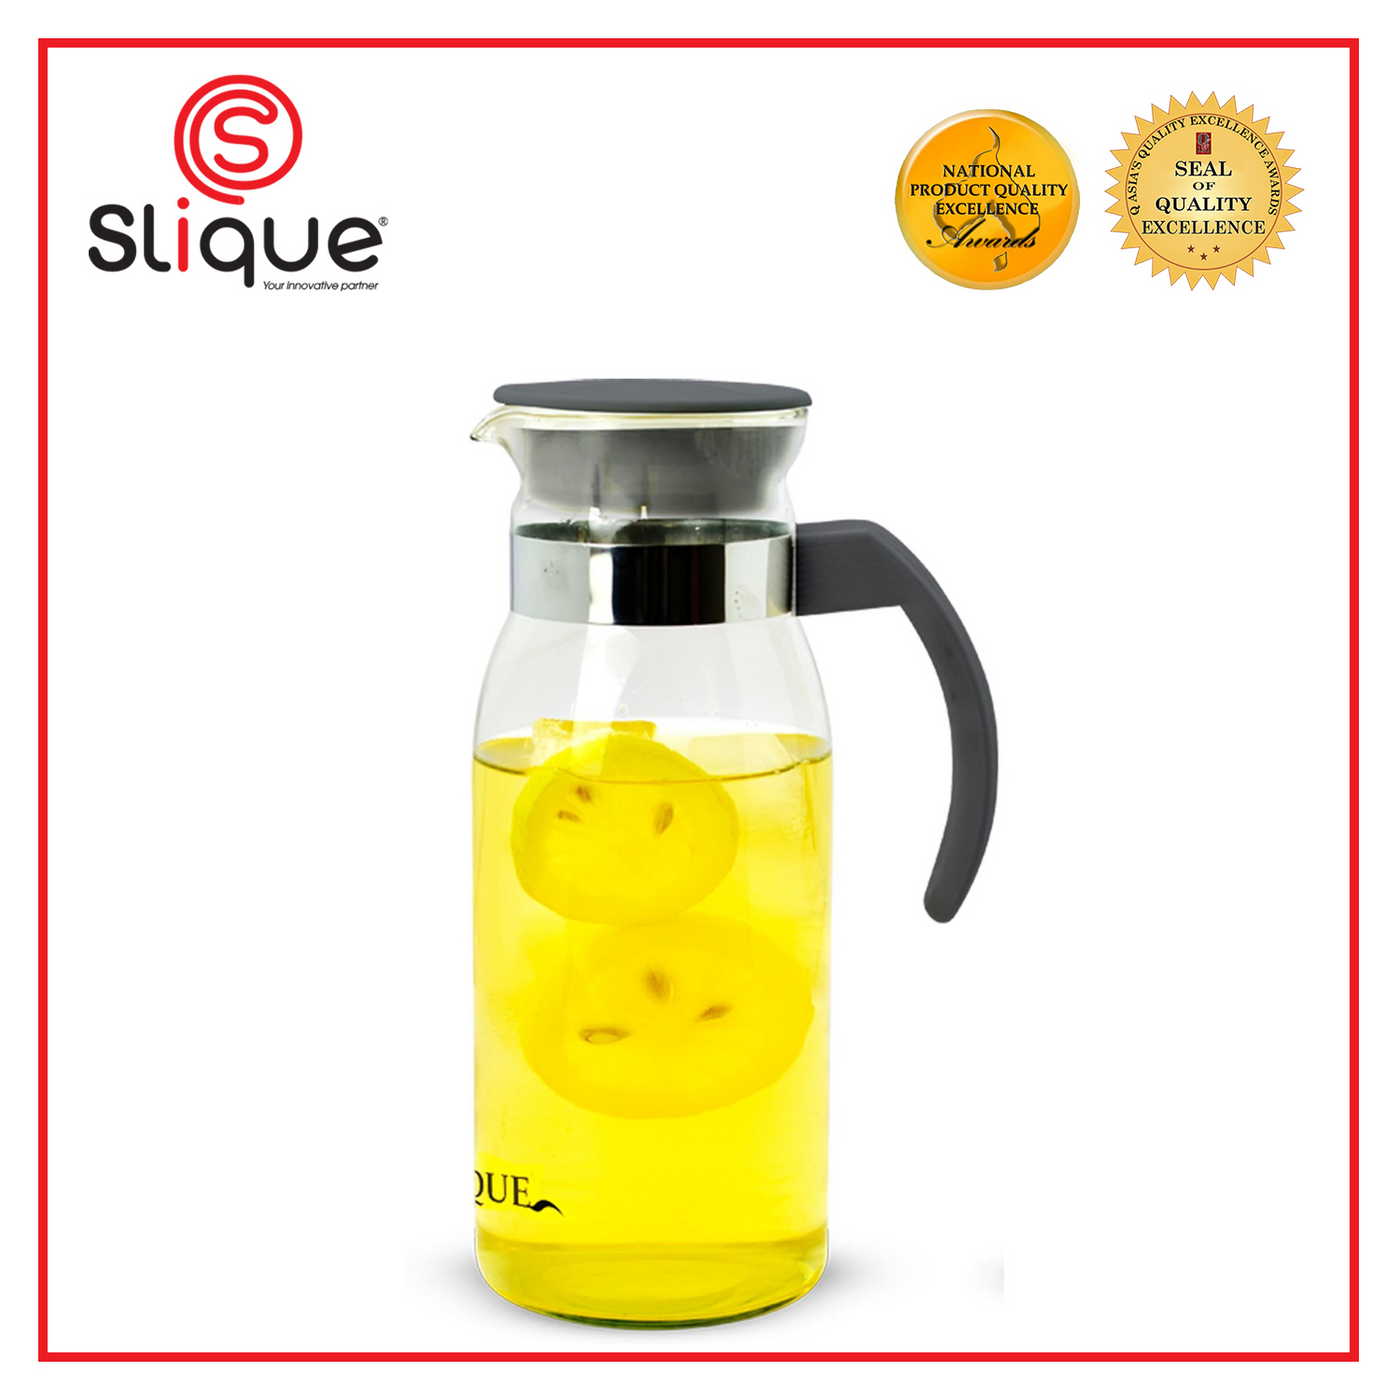 SLIQUE Premium Glass Bottle w/ Cover Pitcher 1000mL Amazing Gift Idea For Any Occasion!